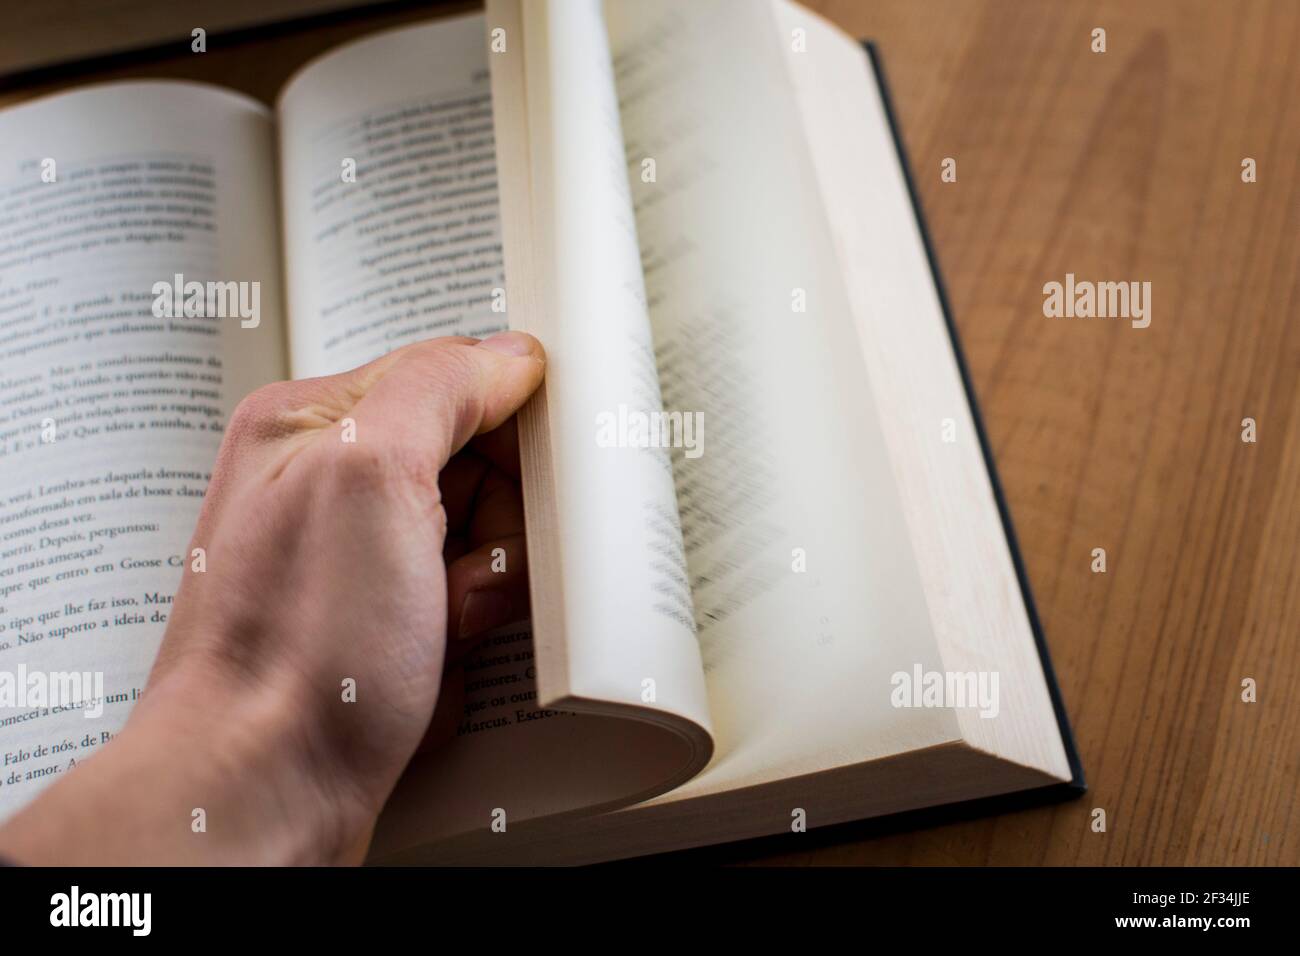 Human hand opening a hard cover book on top of a desk, sliding the pages Stock Photo